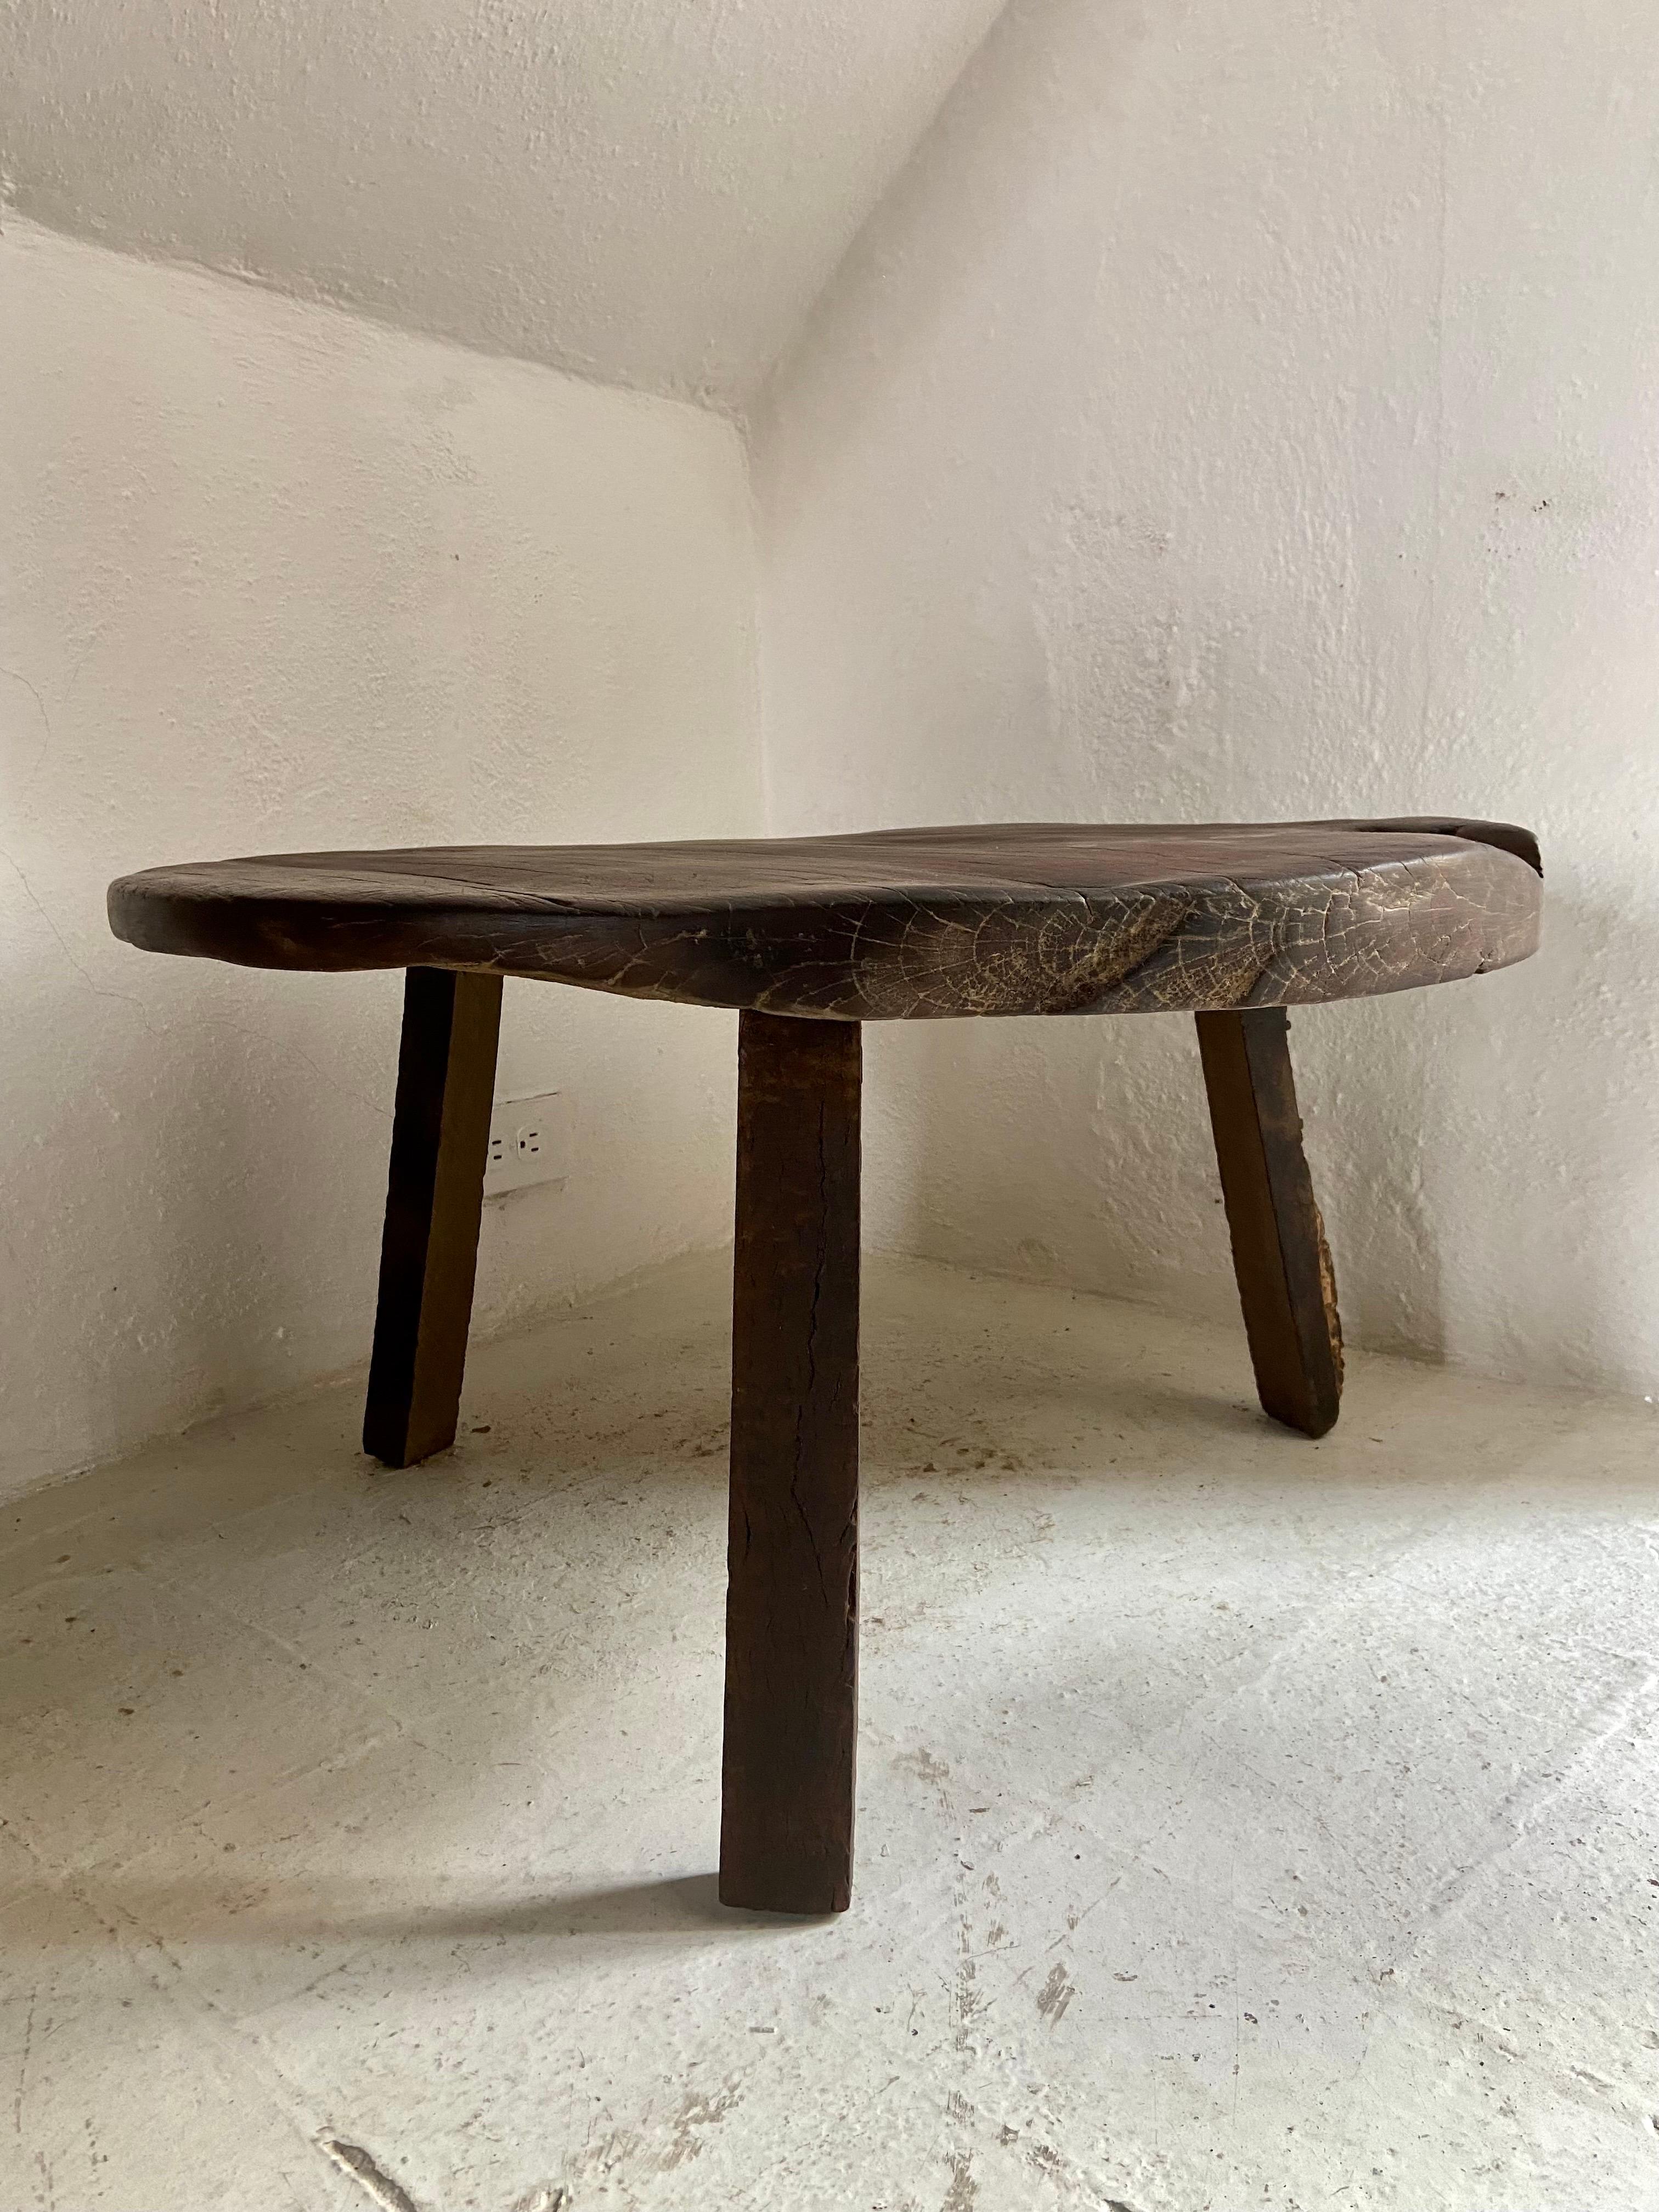 Primitive styled low roundtable from Yucatan, Mexico, circa 1960's. Strong character, deep color and patina. The table is of an unusual size. Tree trunks at these sizes are no longer available in the rainforest. These low tables are really only used